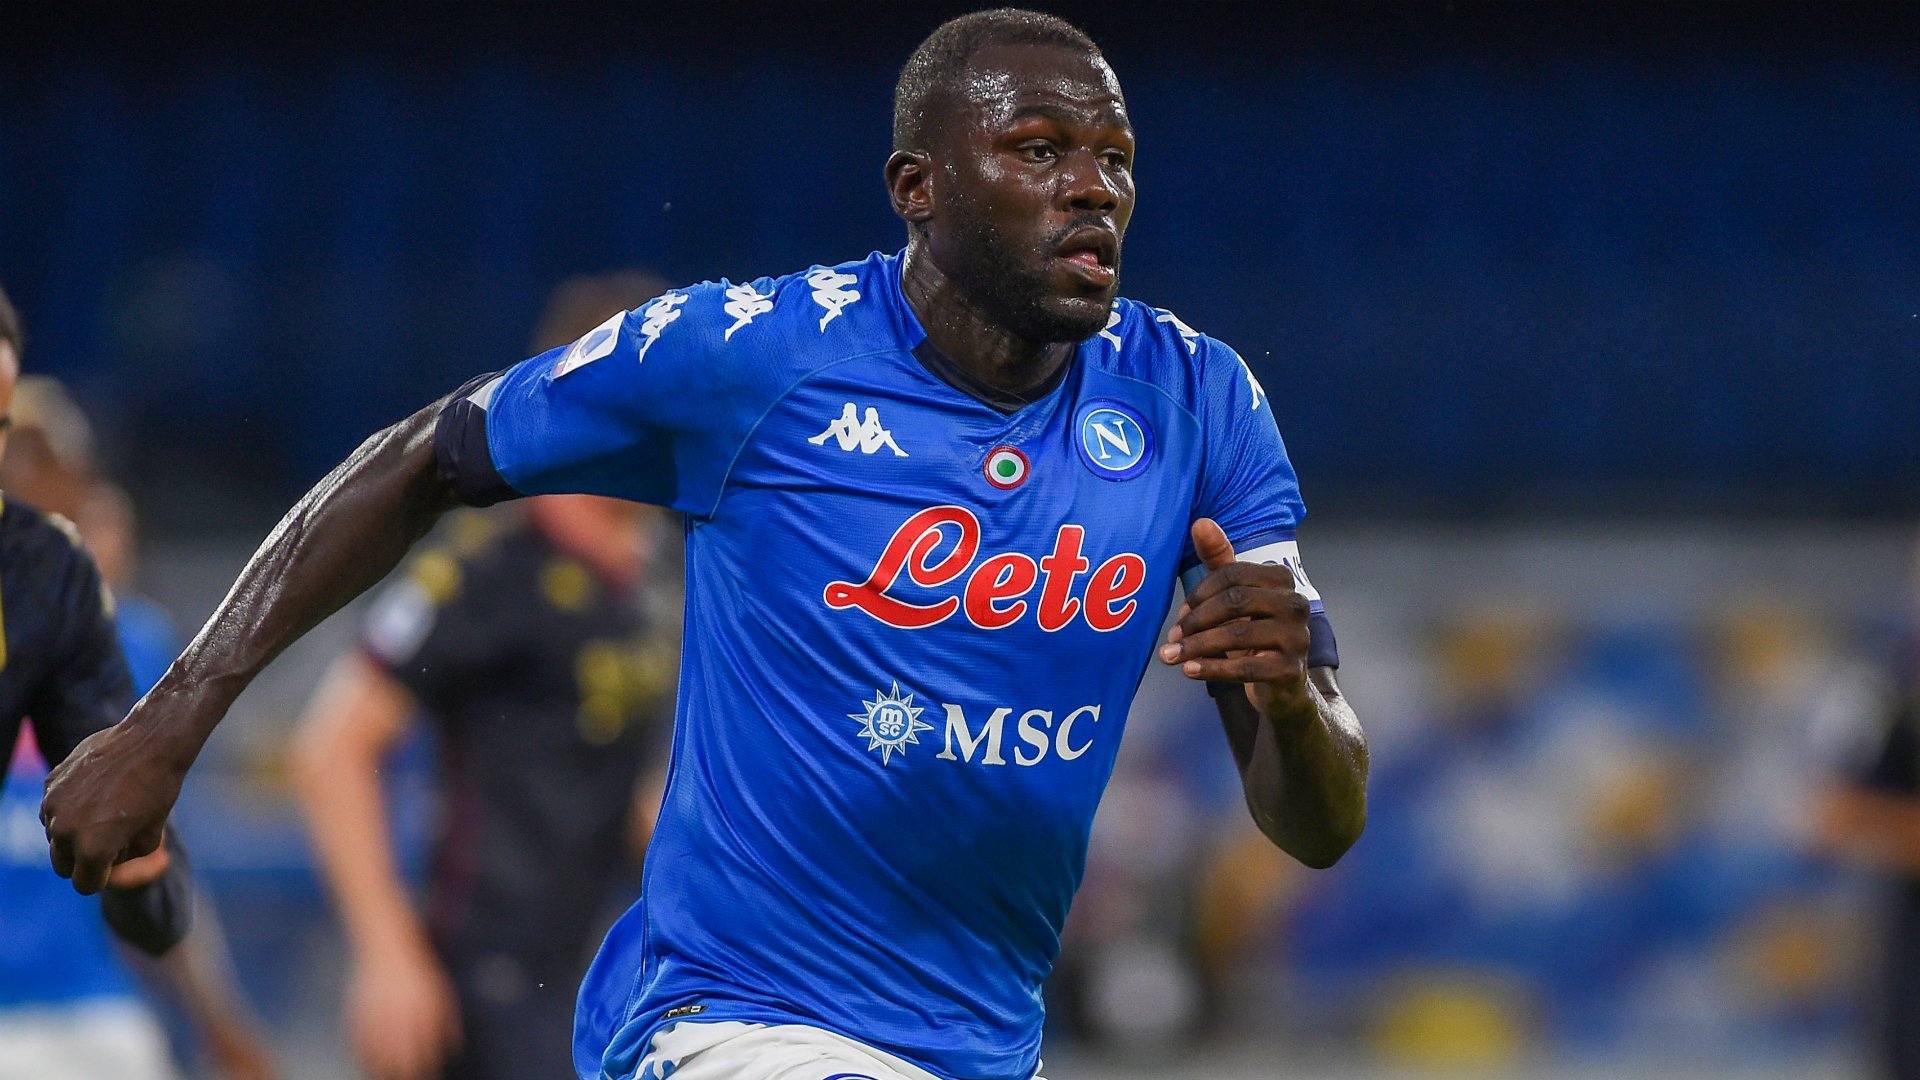 Kalidou Koulibaly was the topic of conversation before and after Napoli's 6-0 demolition of Genoa on Sunday.